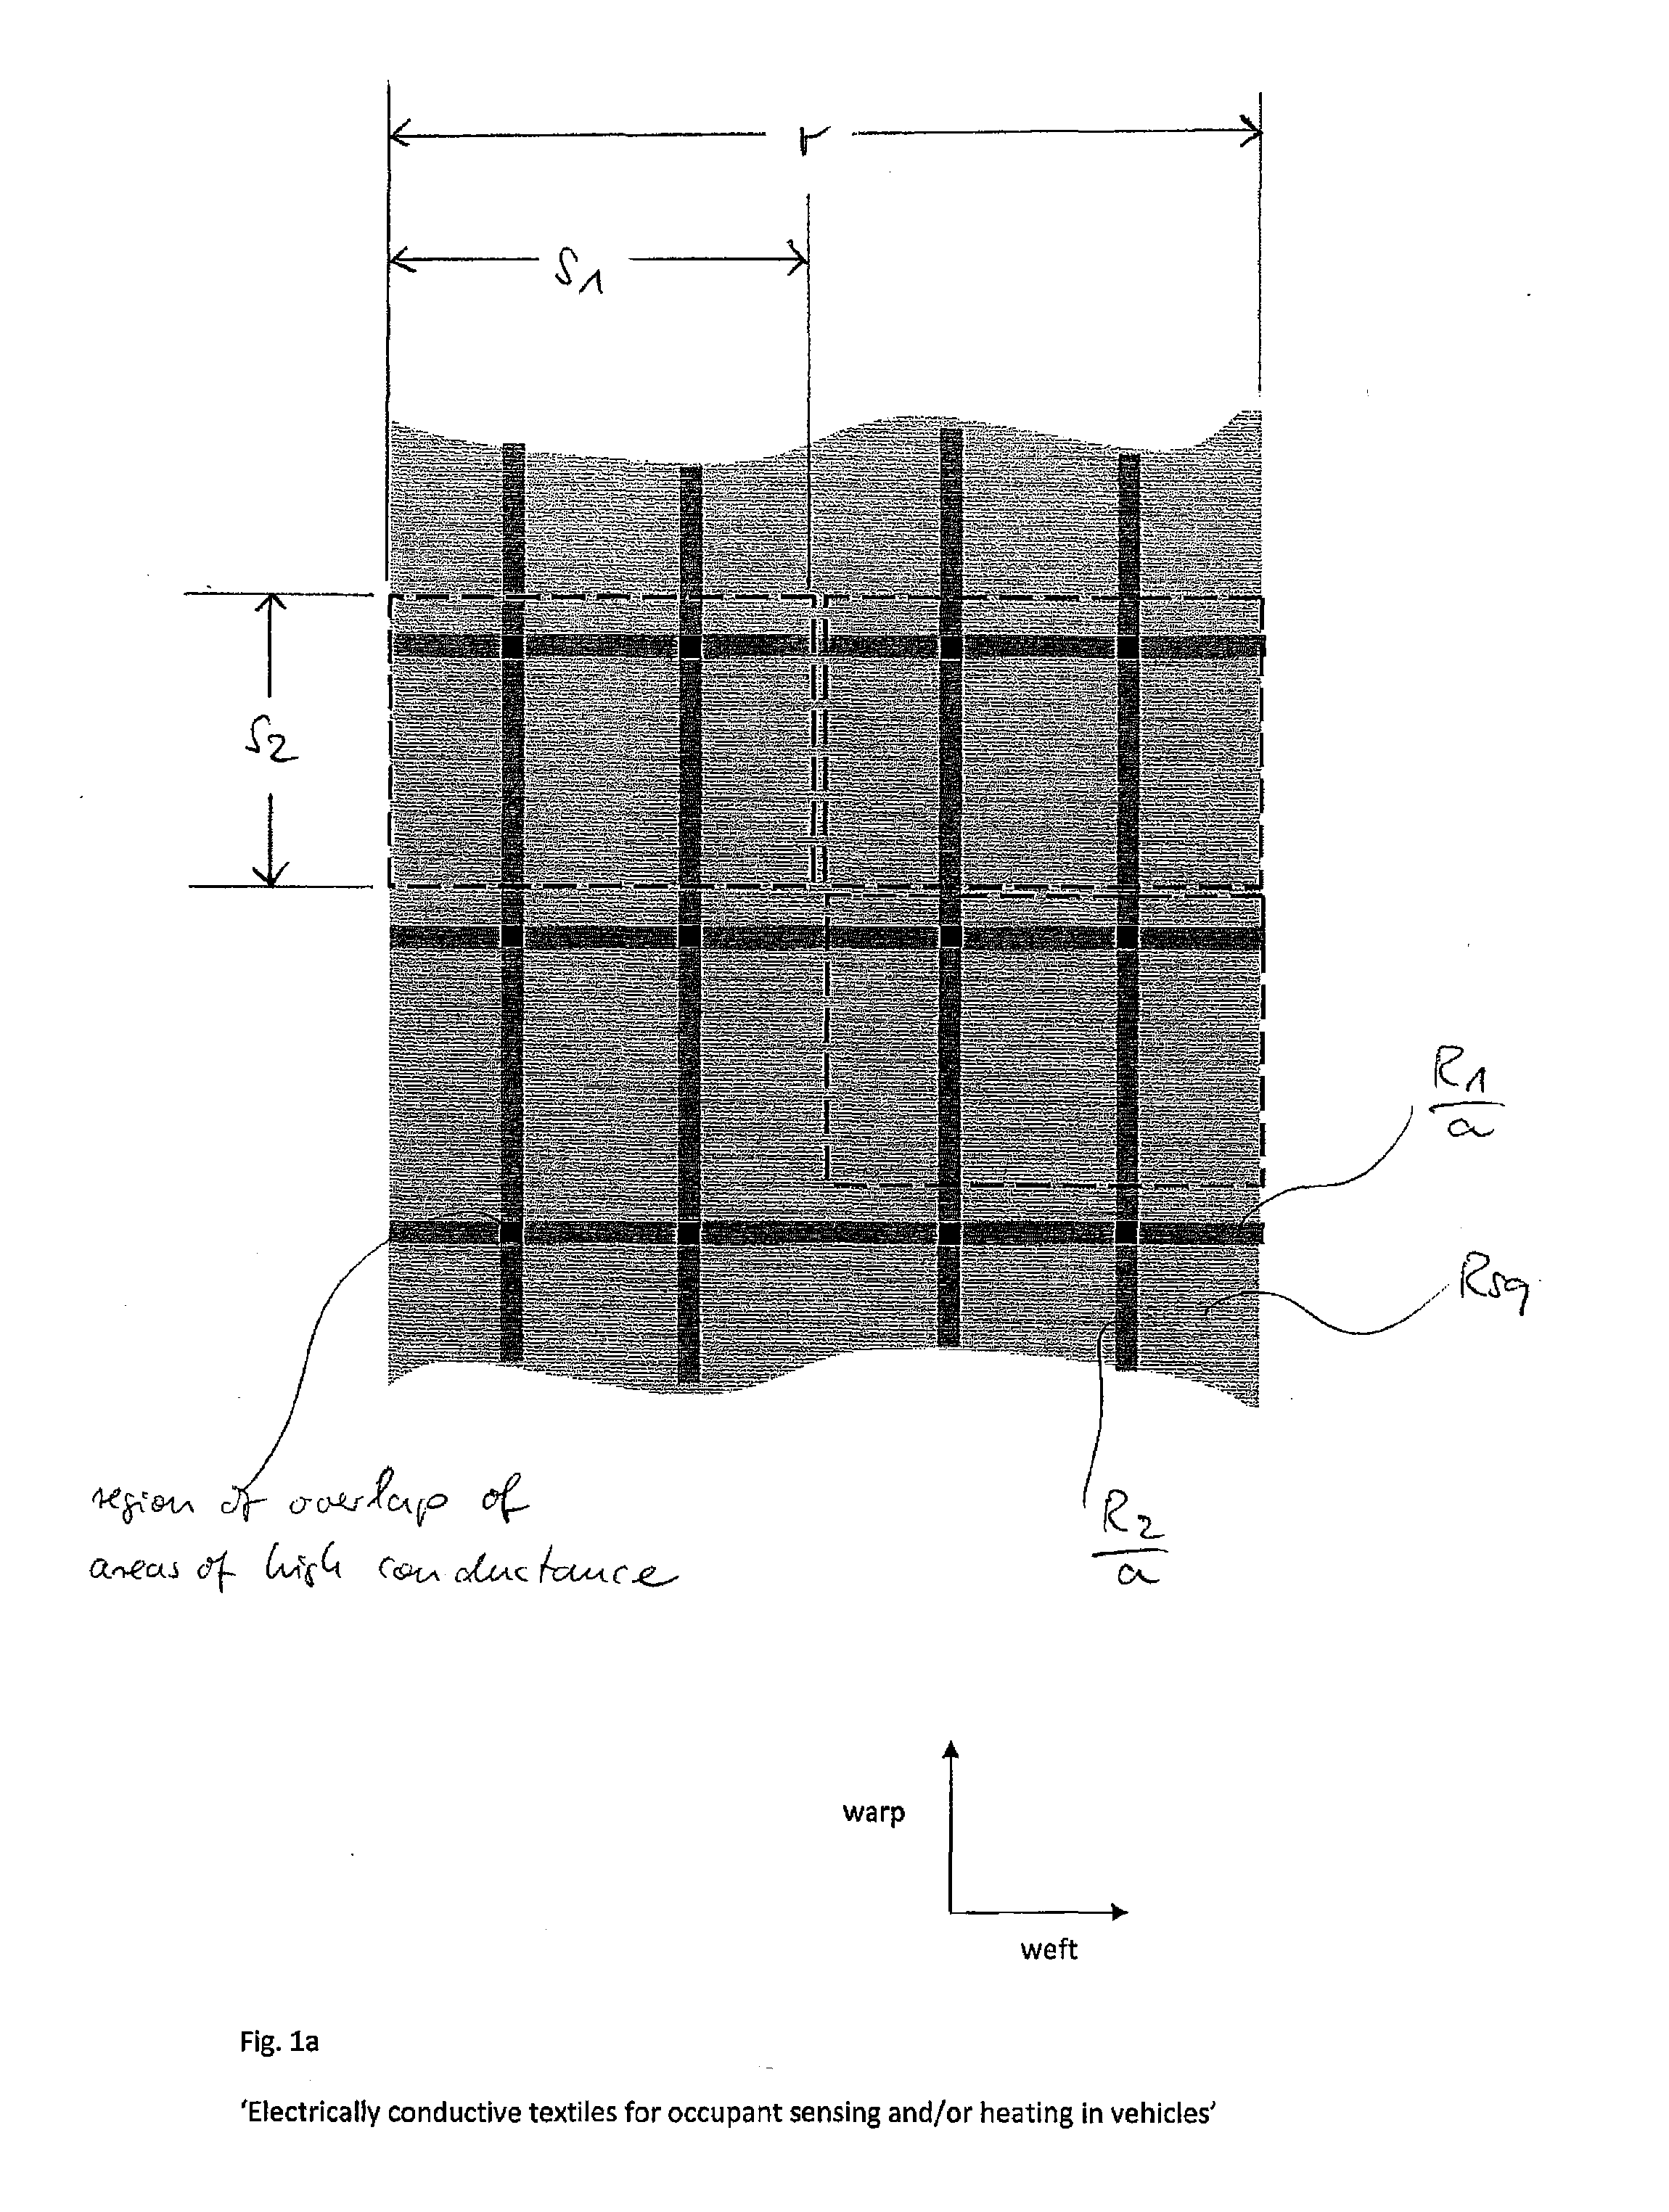 Electrically conductive textiles for occupant sensing and/or heating applications